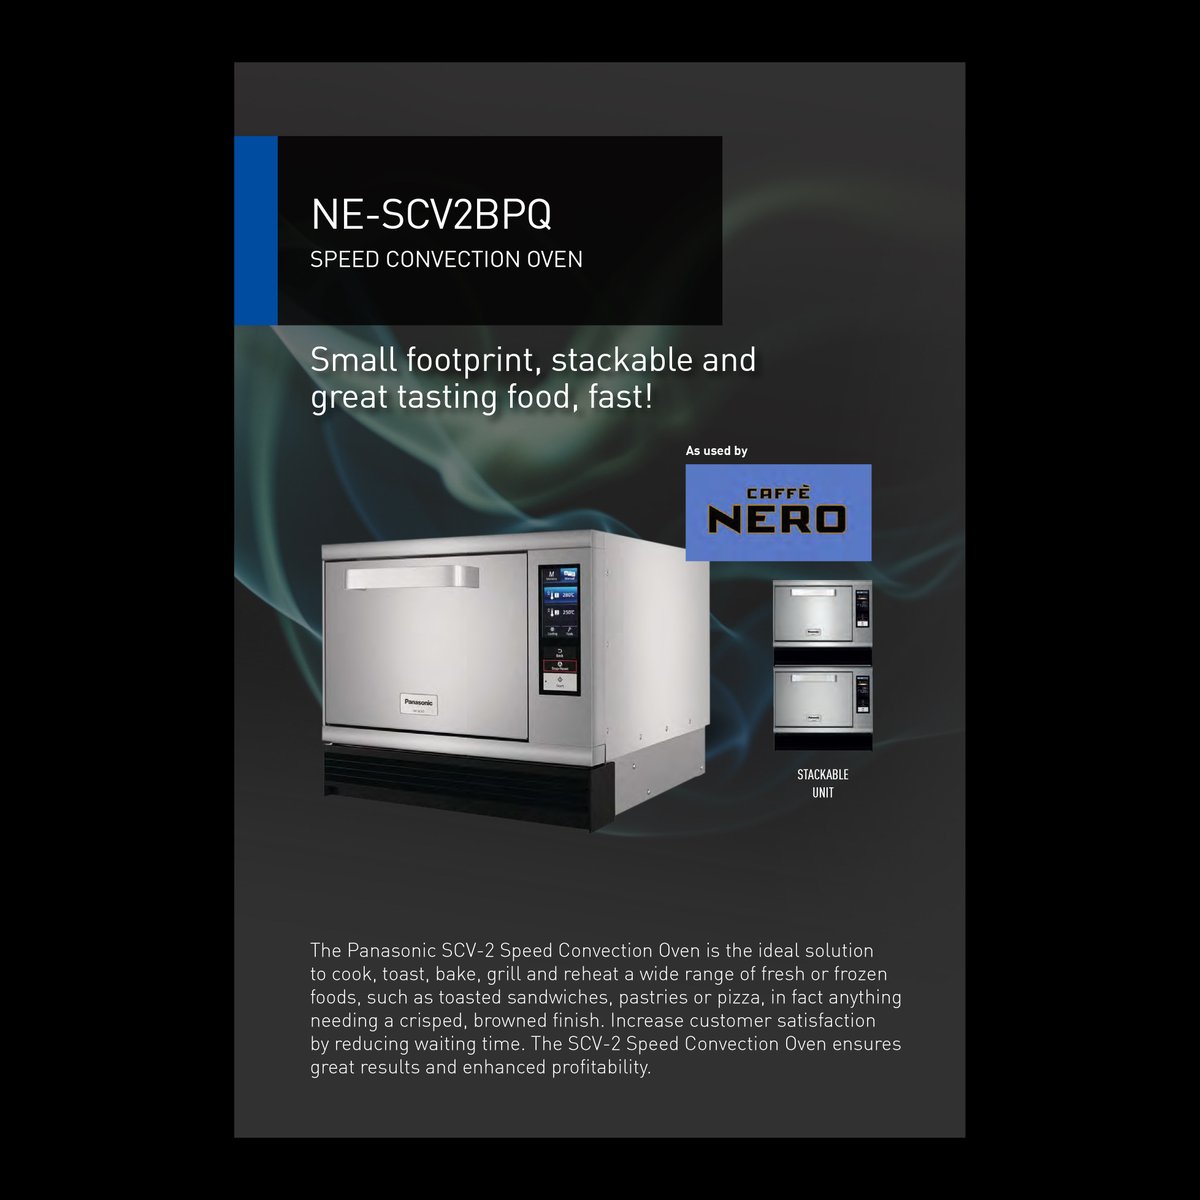 Download our latest catalogue and find out about our pro cooking technology. ow.ly/n7Tv50E65wG